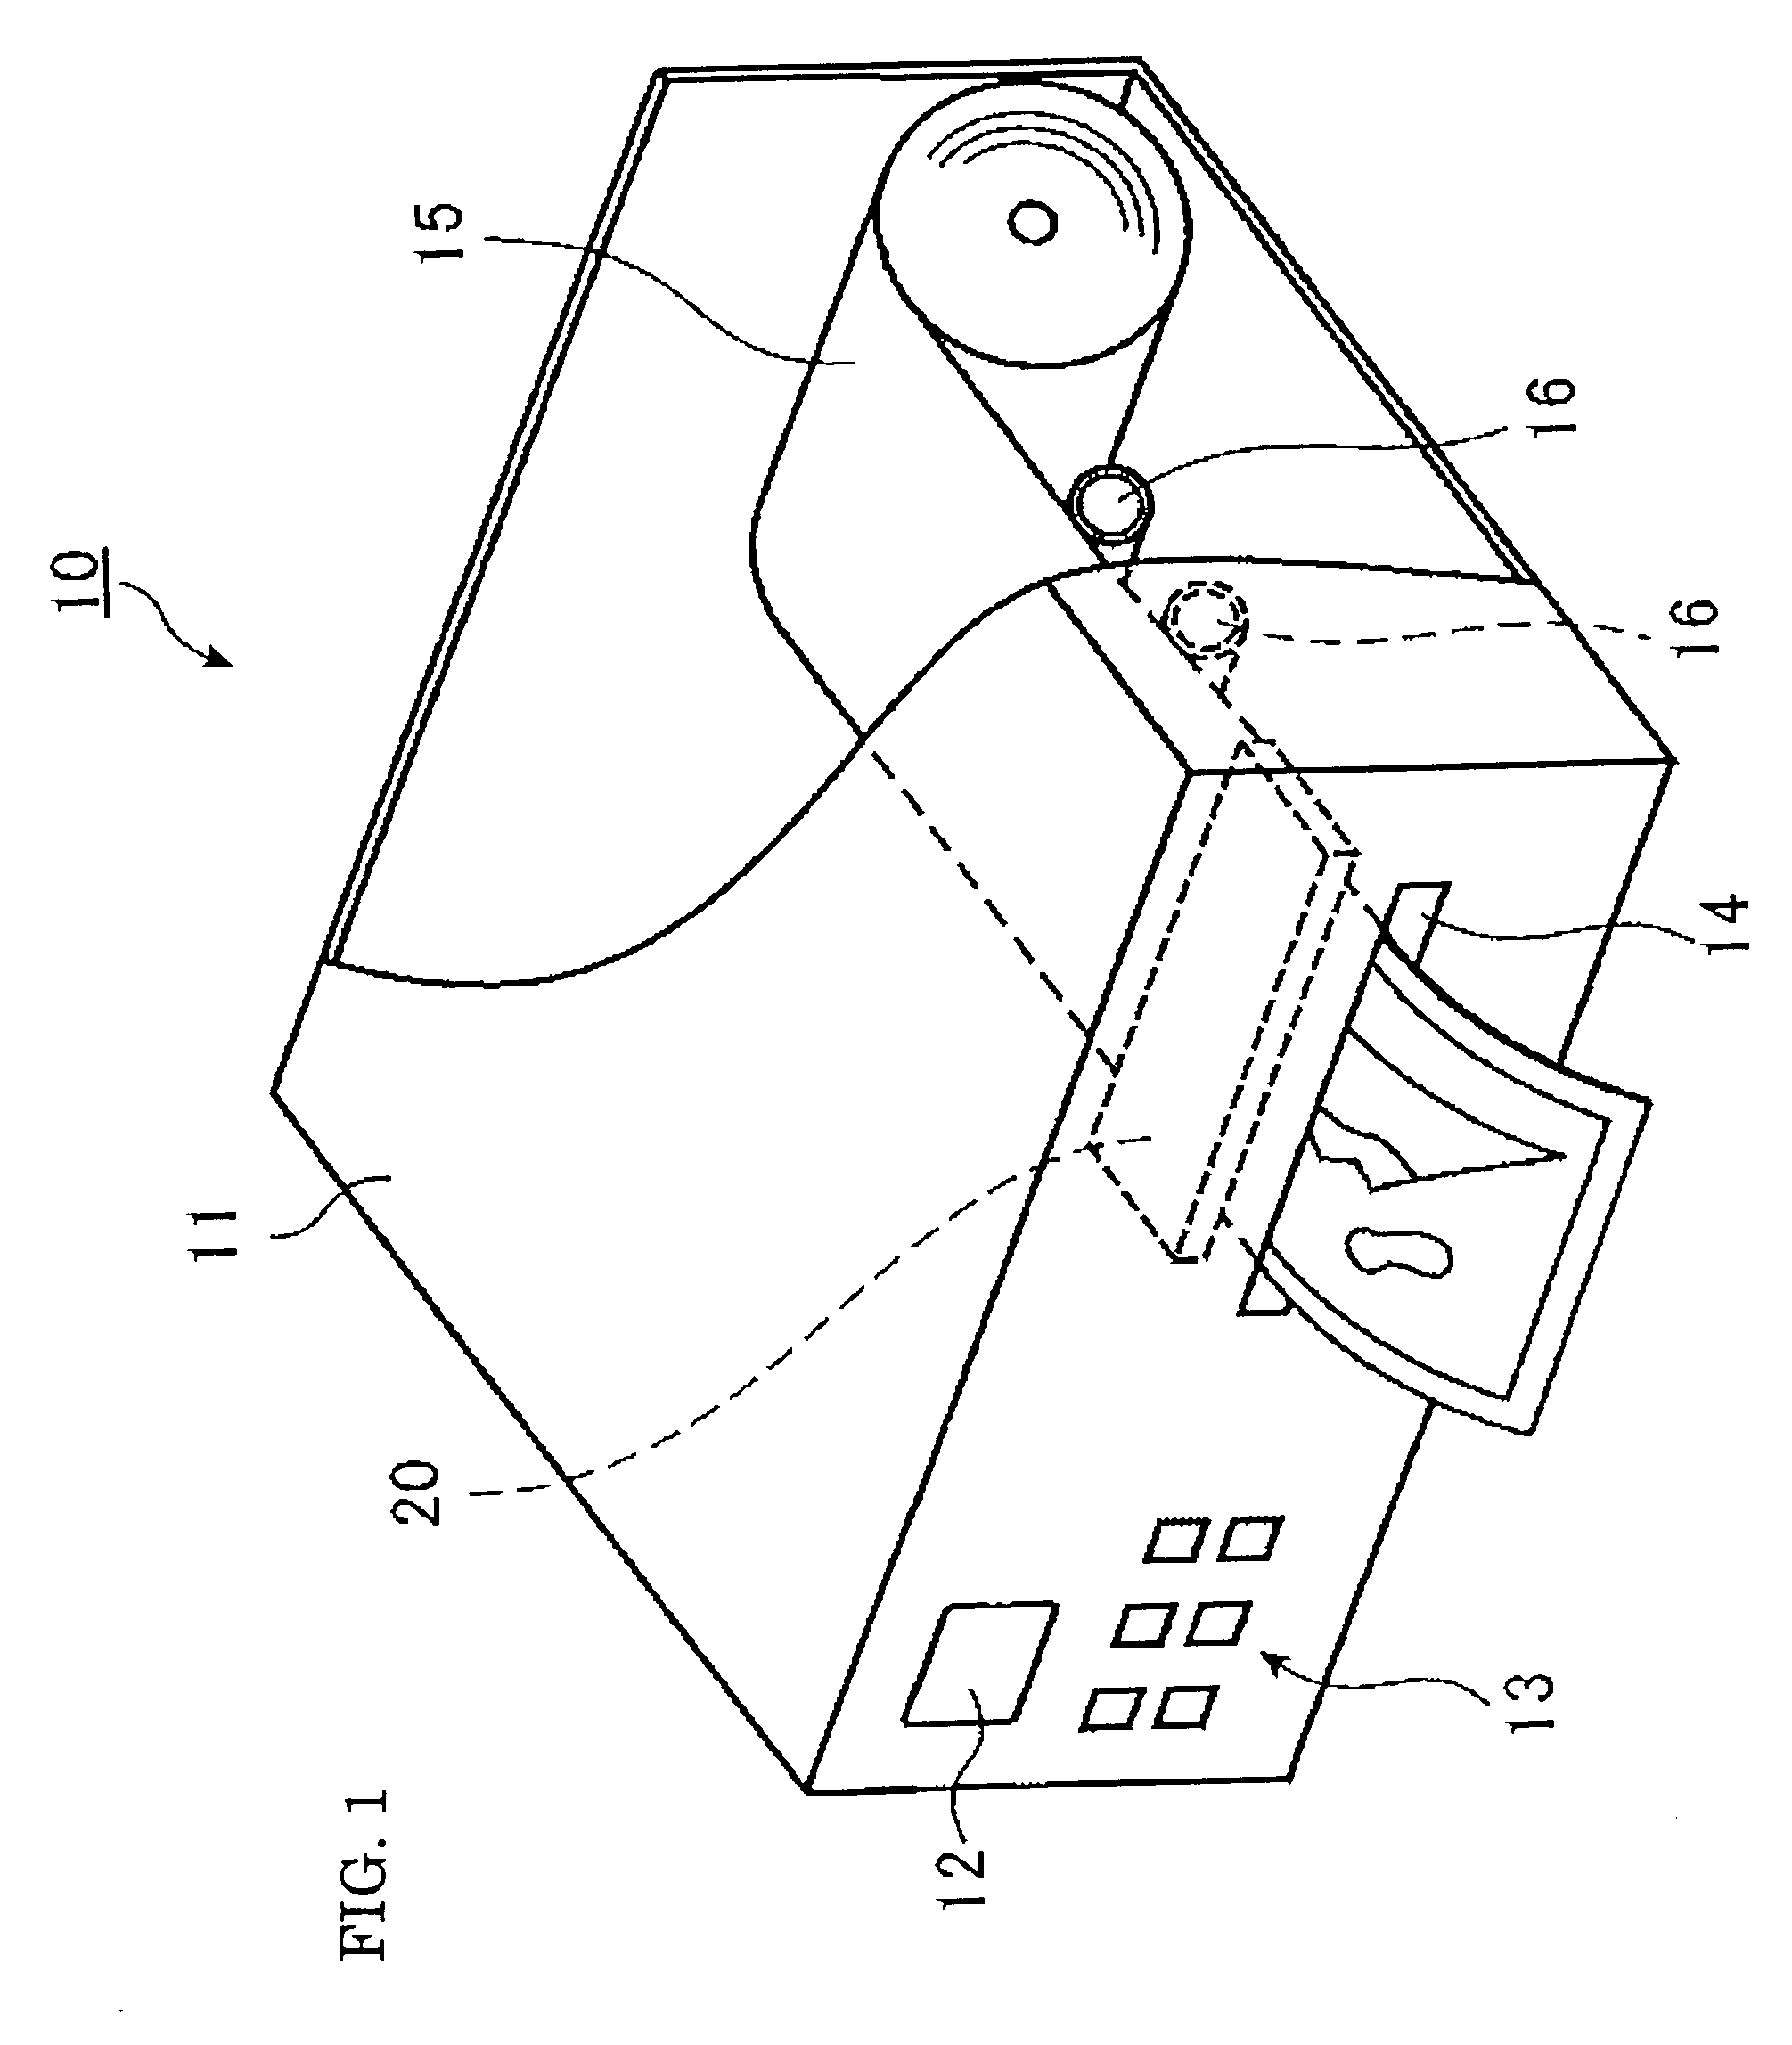 Thermalhead, method for manufacture of same, and printing device provided with same